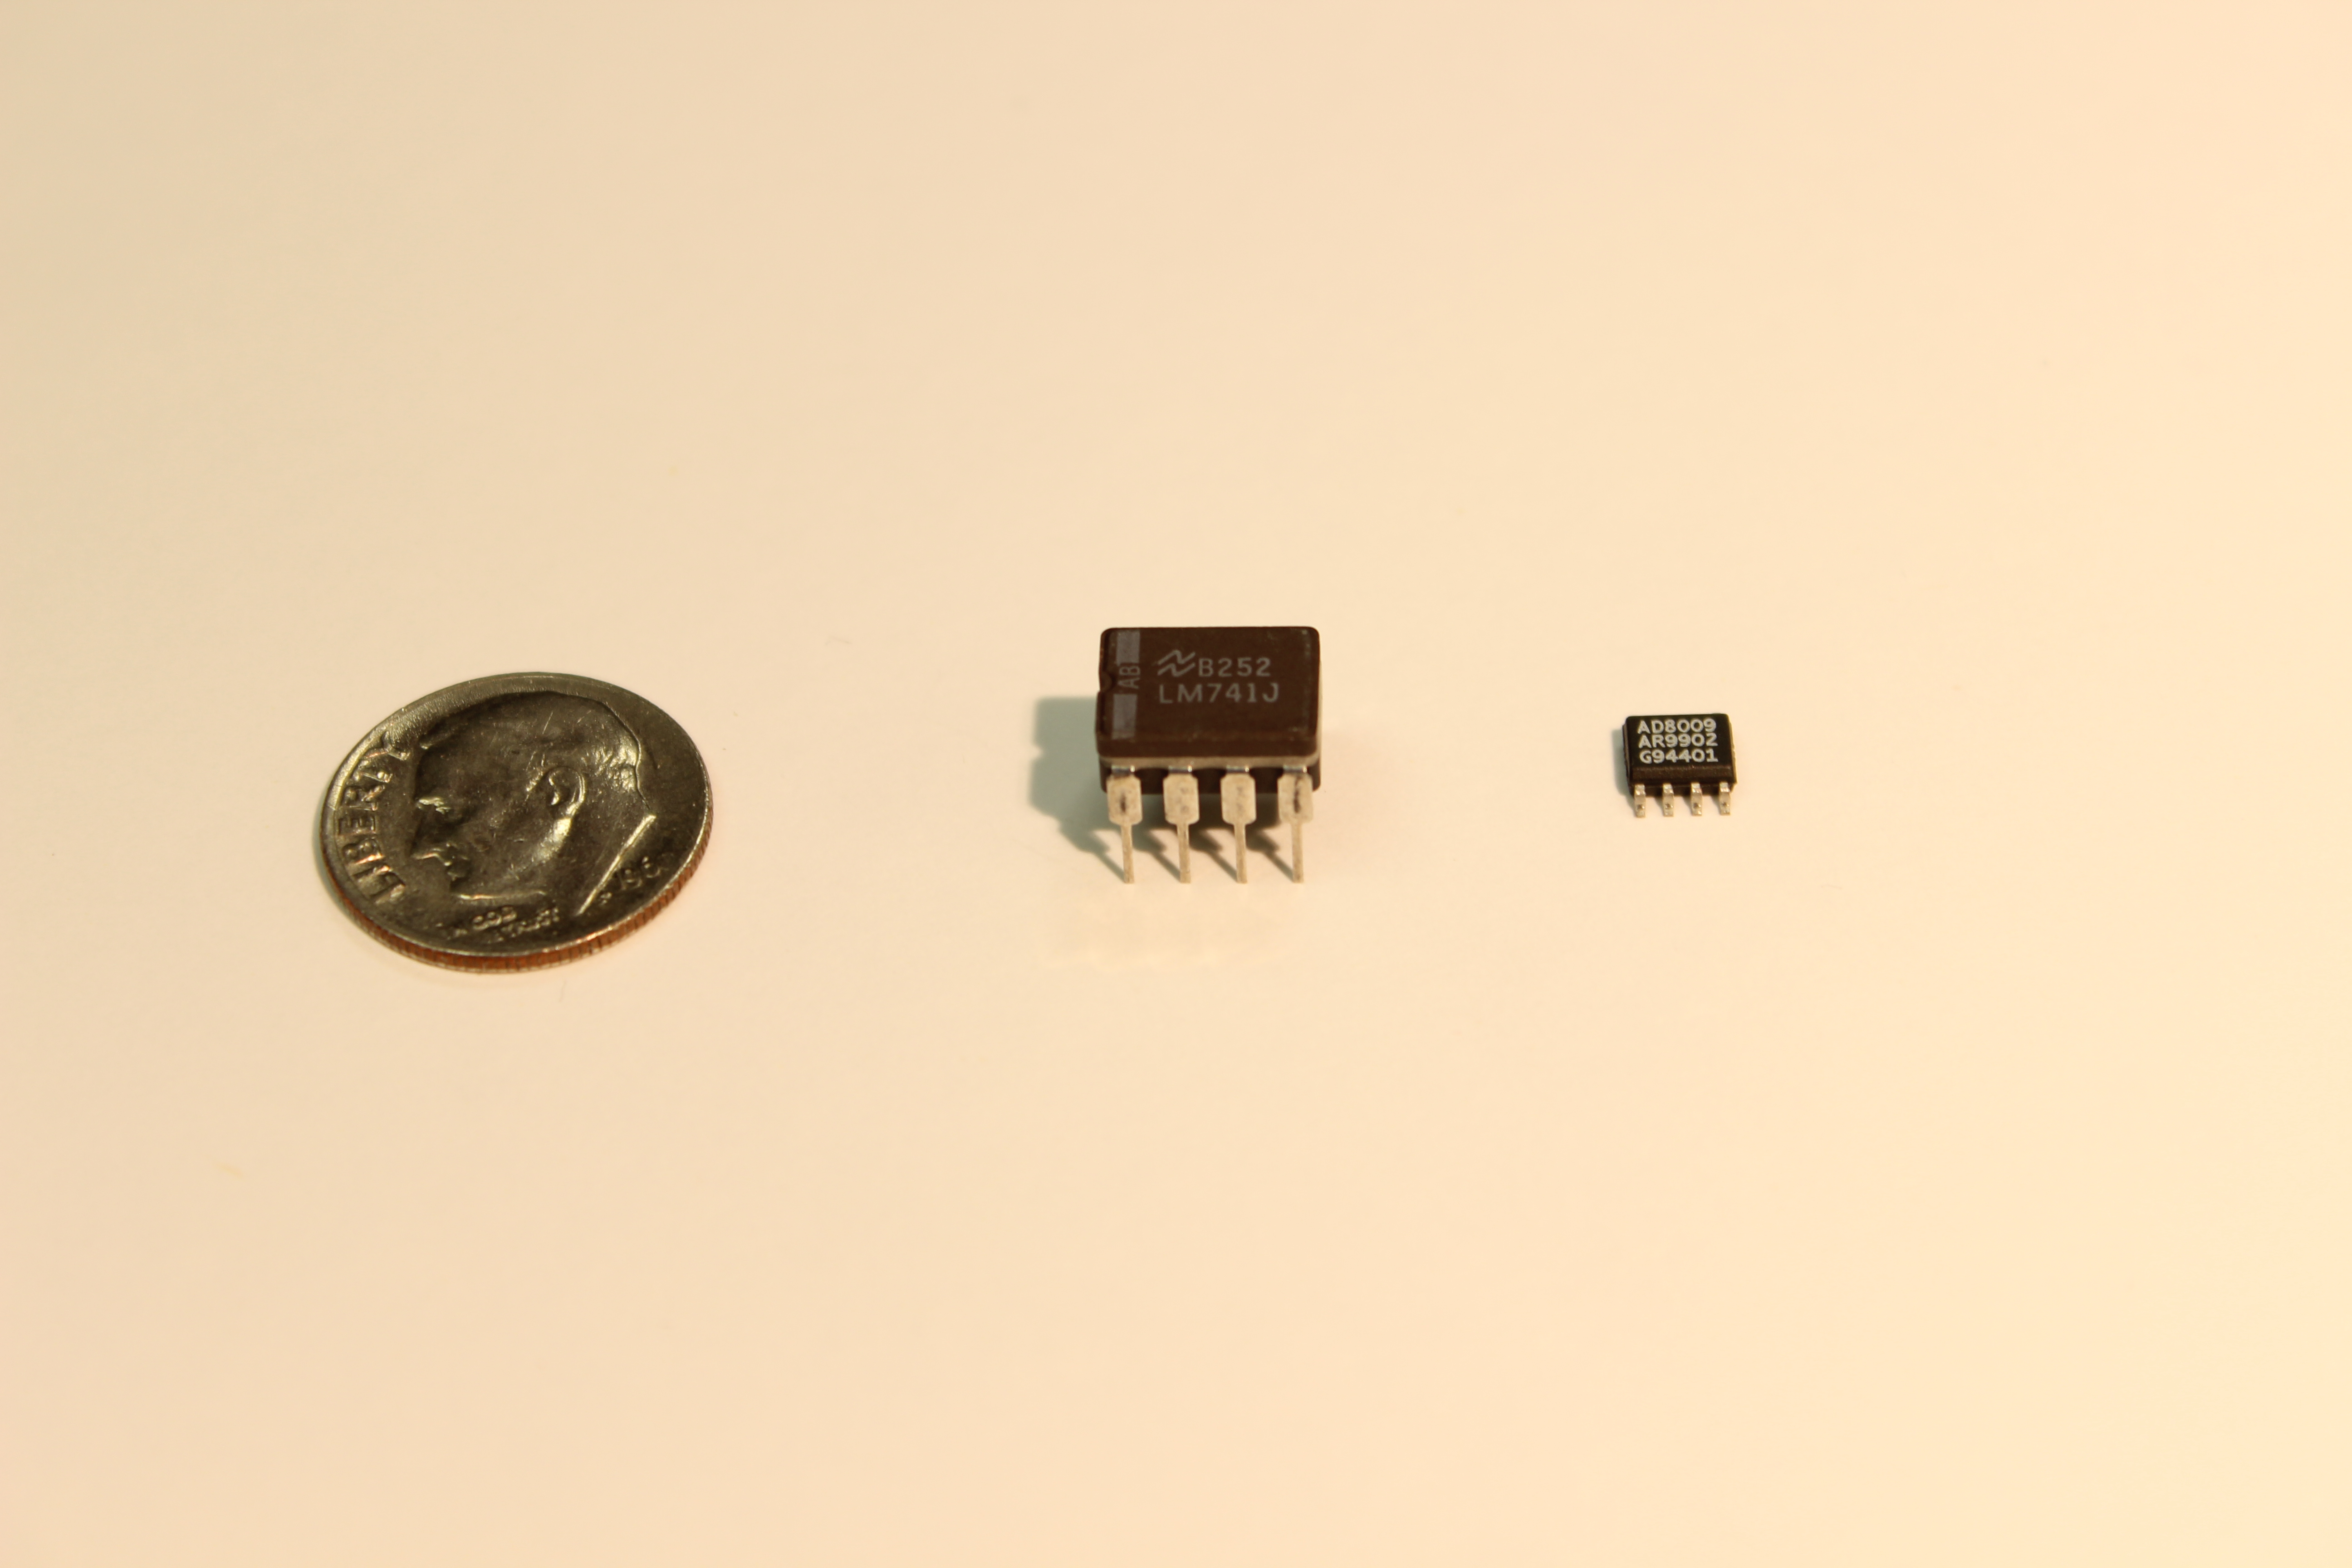 Microprocessor Size Relationship